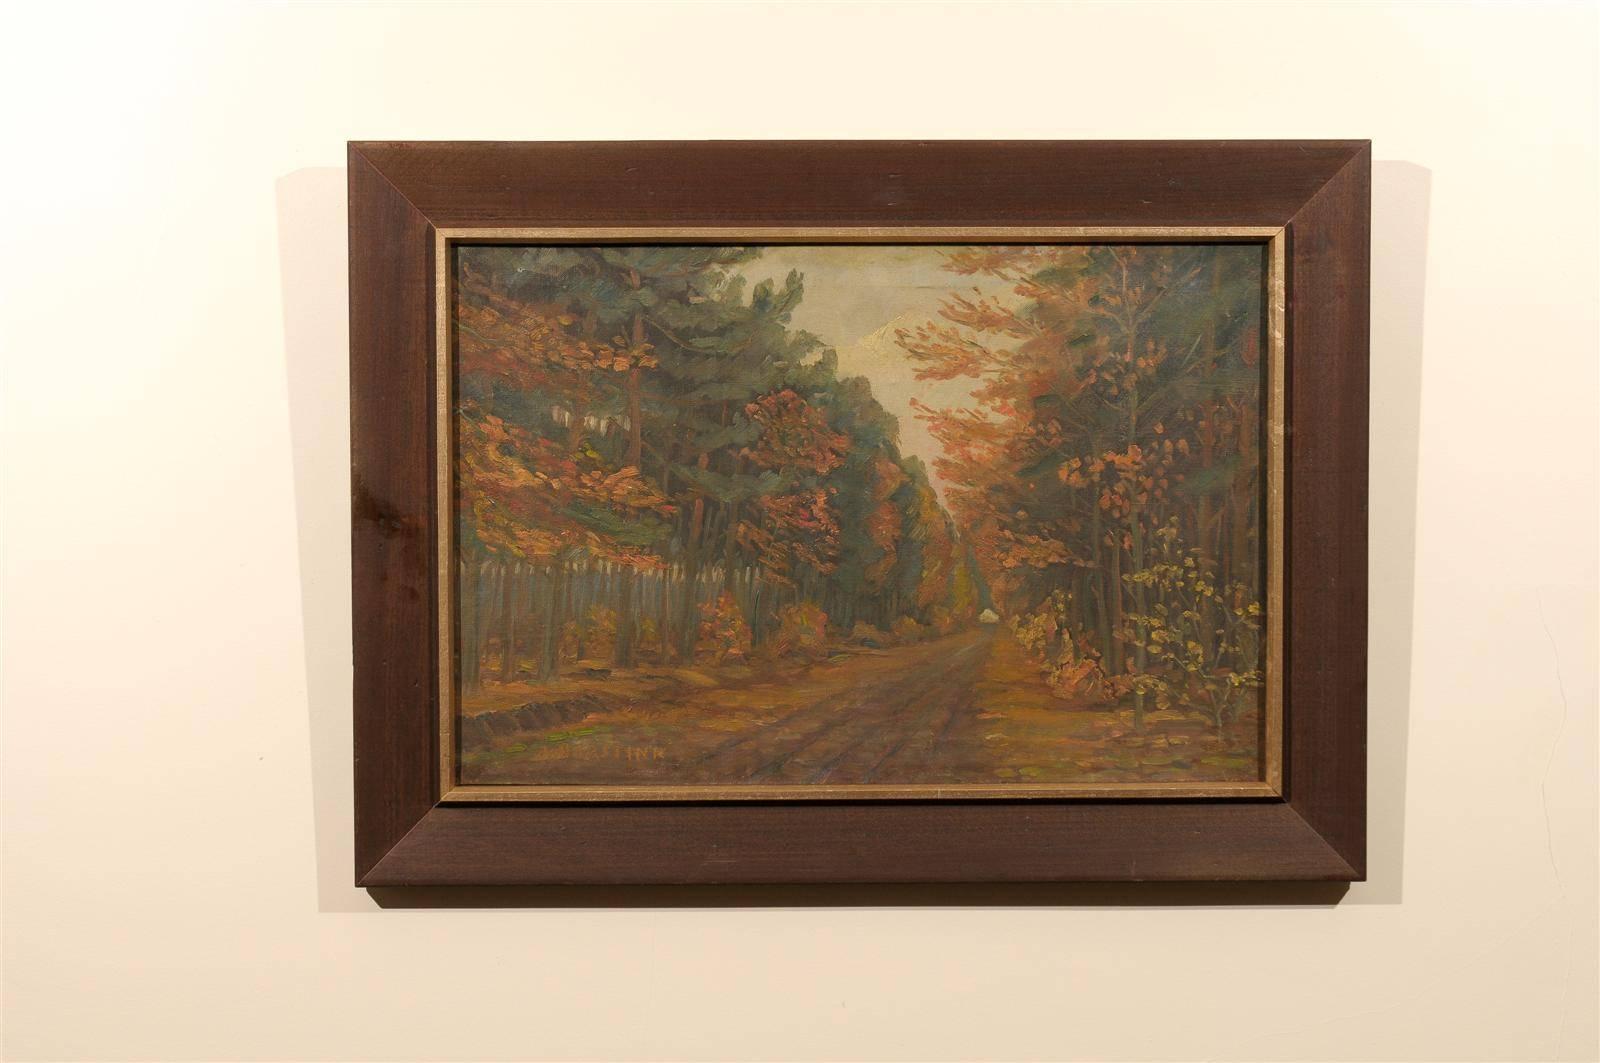 Early 20th century Art Deco Dutch oil on canvas in the Impressionist style of a dirt road flanked by trees in autumn showing the changing of the seasons. The painting is rich in hues of gold, orange, and green. The painting is signed Horstink bottom